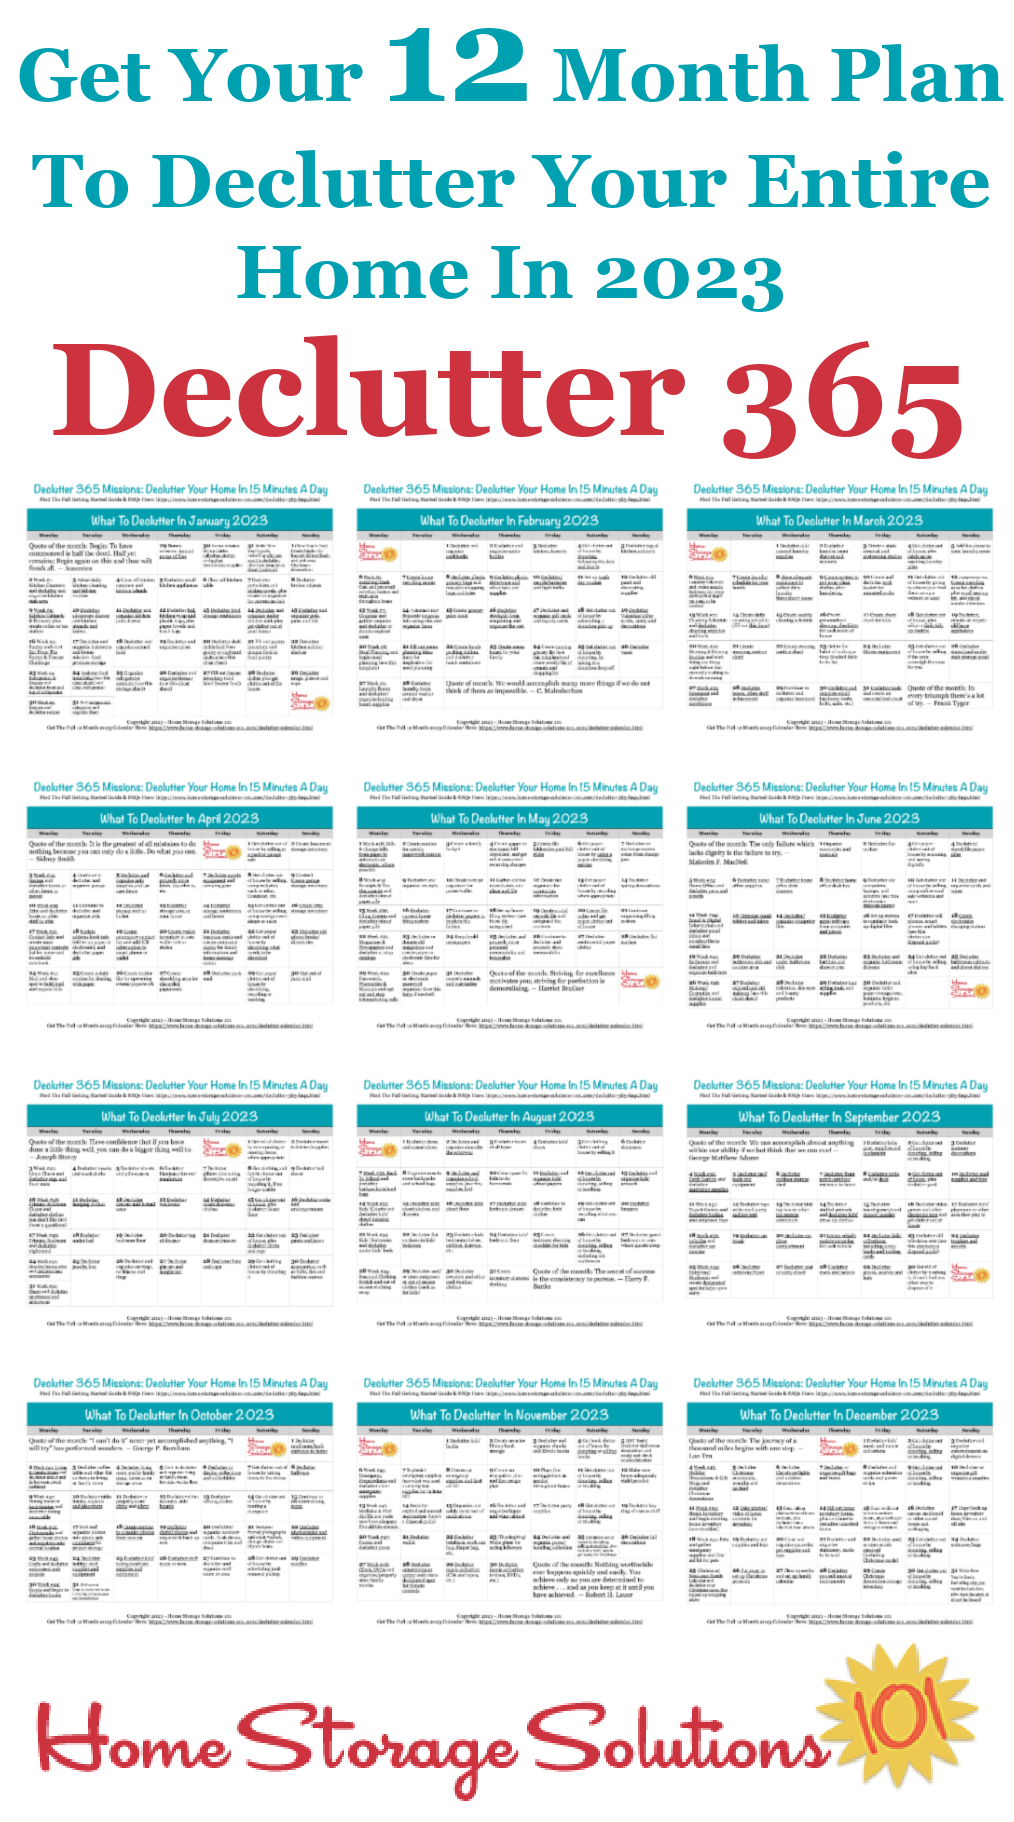 Free 12 month plan to declutter your entire home in 2023, including printable calendar pages from January through December, with daily 15 minute decluttering missions. If you feel overwhelmed this plan will help, because it gives you proven step by step instructions! {courtesy of Home Storage Solutions 101} #Declutter365 #Declutter #Decluttering